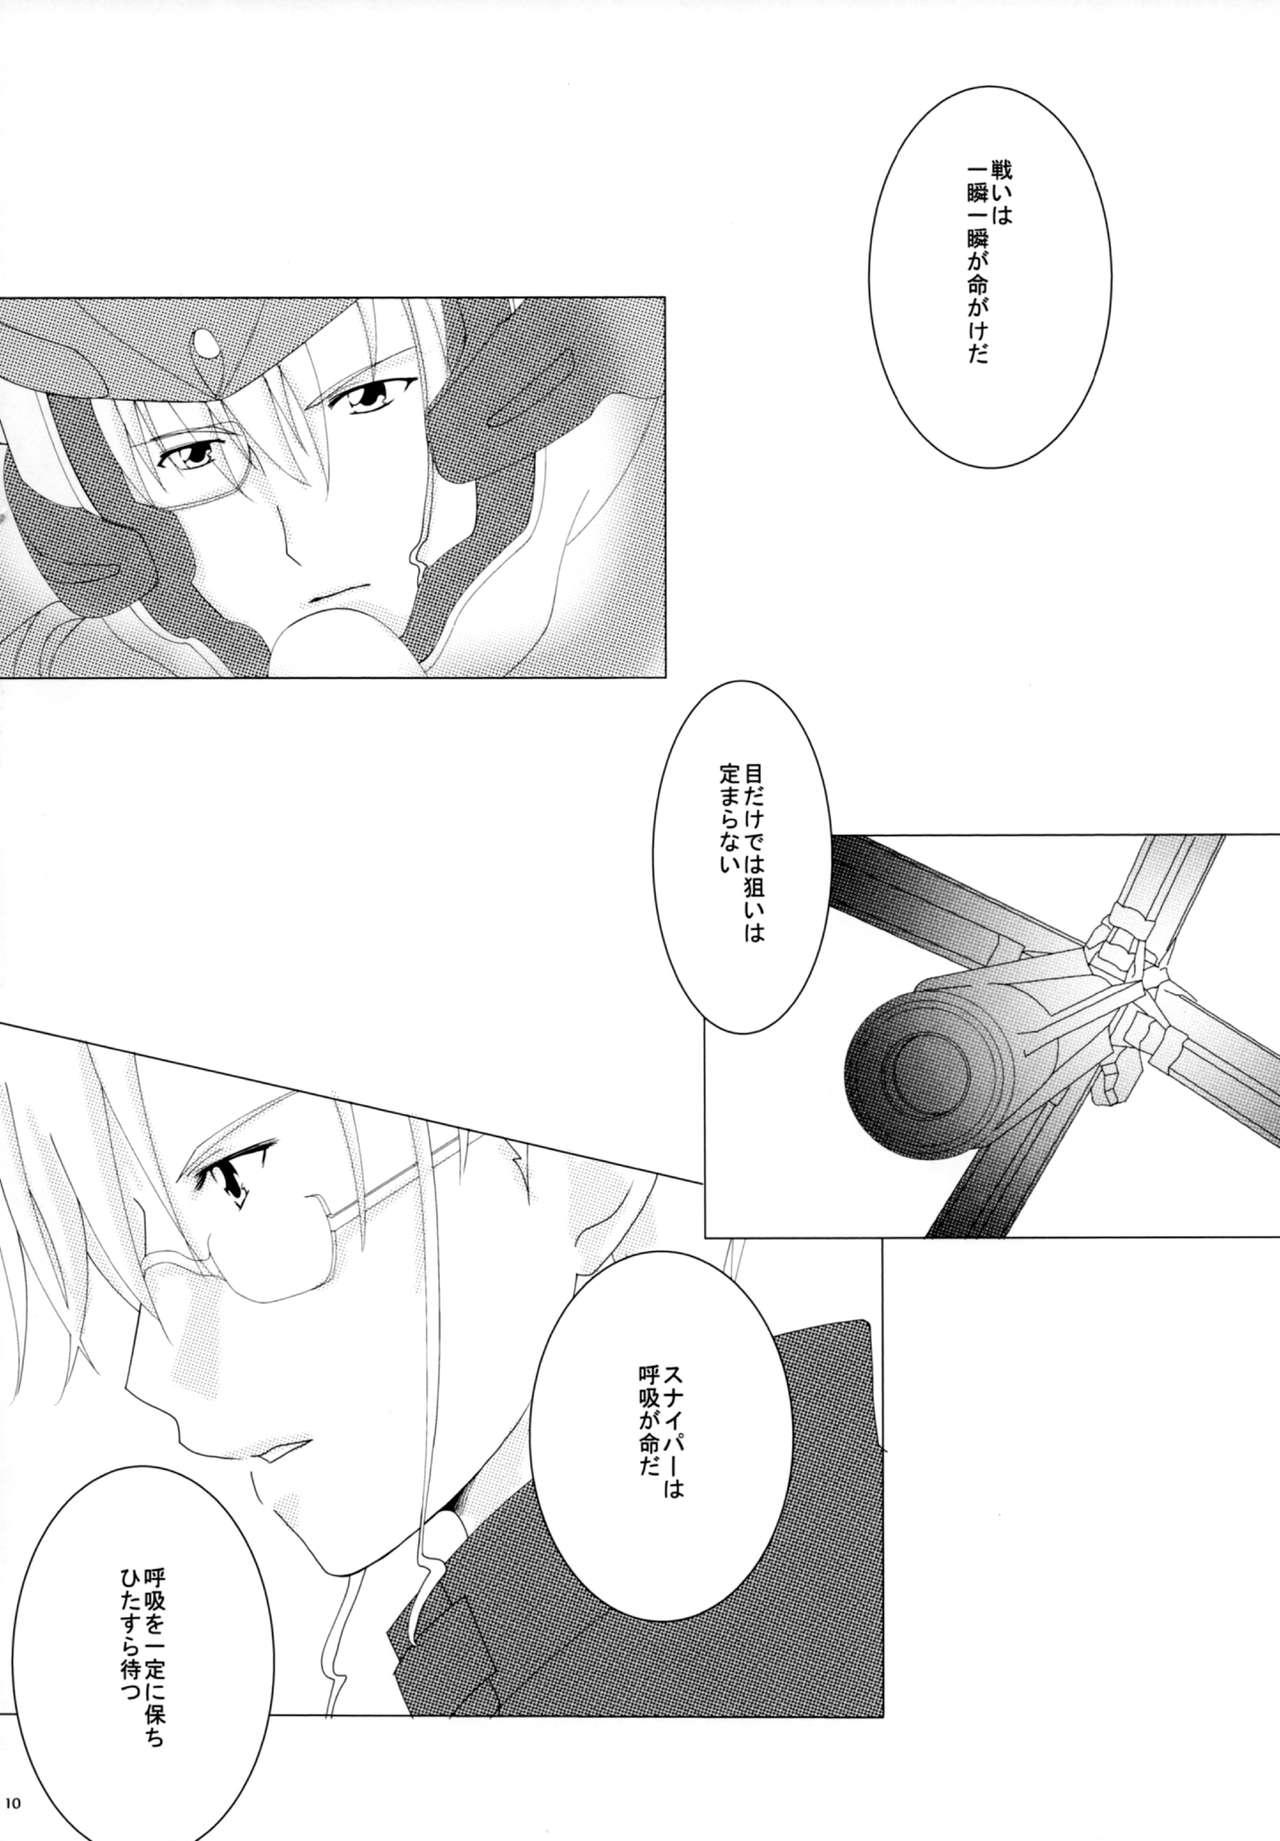 Threesome Notre Souhait - Macross frontier Rope - Page 9